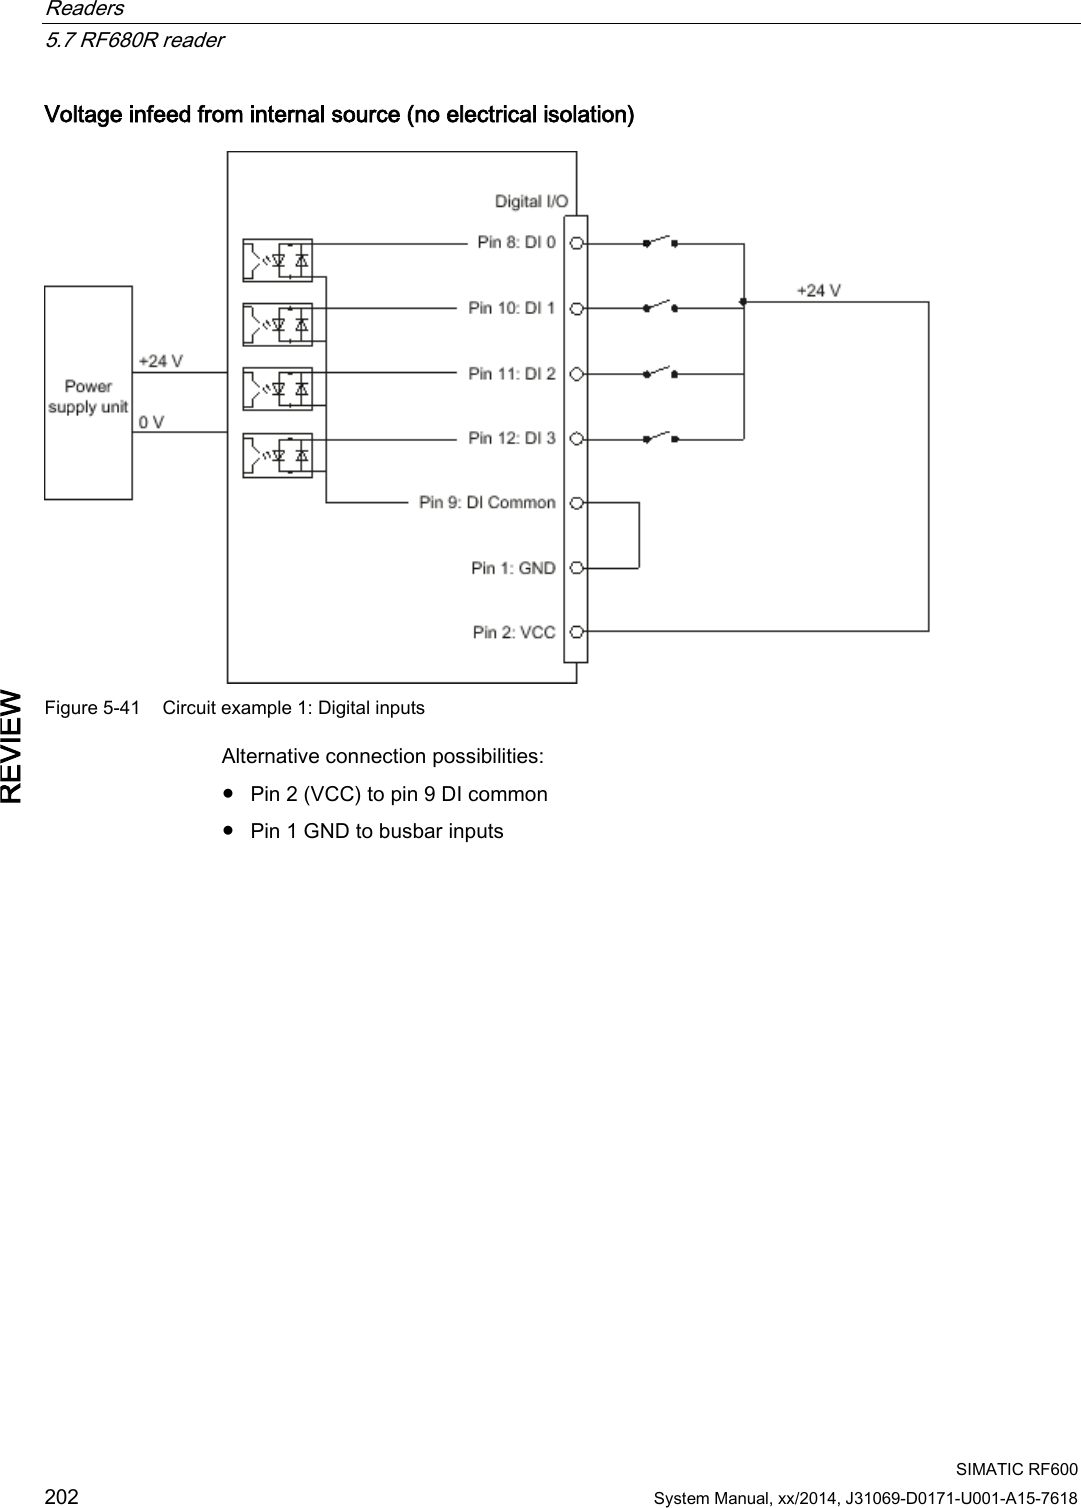 Readers   5.7 RF680R reader  SIMATIC RF600 202 System Manual, xx/2014, J31069-D0171-U001-A15-7618 REVIEW Voltage infeed from internal source (no electrical isolation)  Figure 5-41 Circuit example 1: Digital inputs Alternative connection possibilities: ● Pin 2 (VCC) to pin 9 DI common ● Pin 1 GND to busbar inputs 